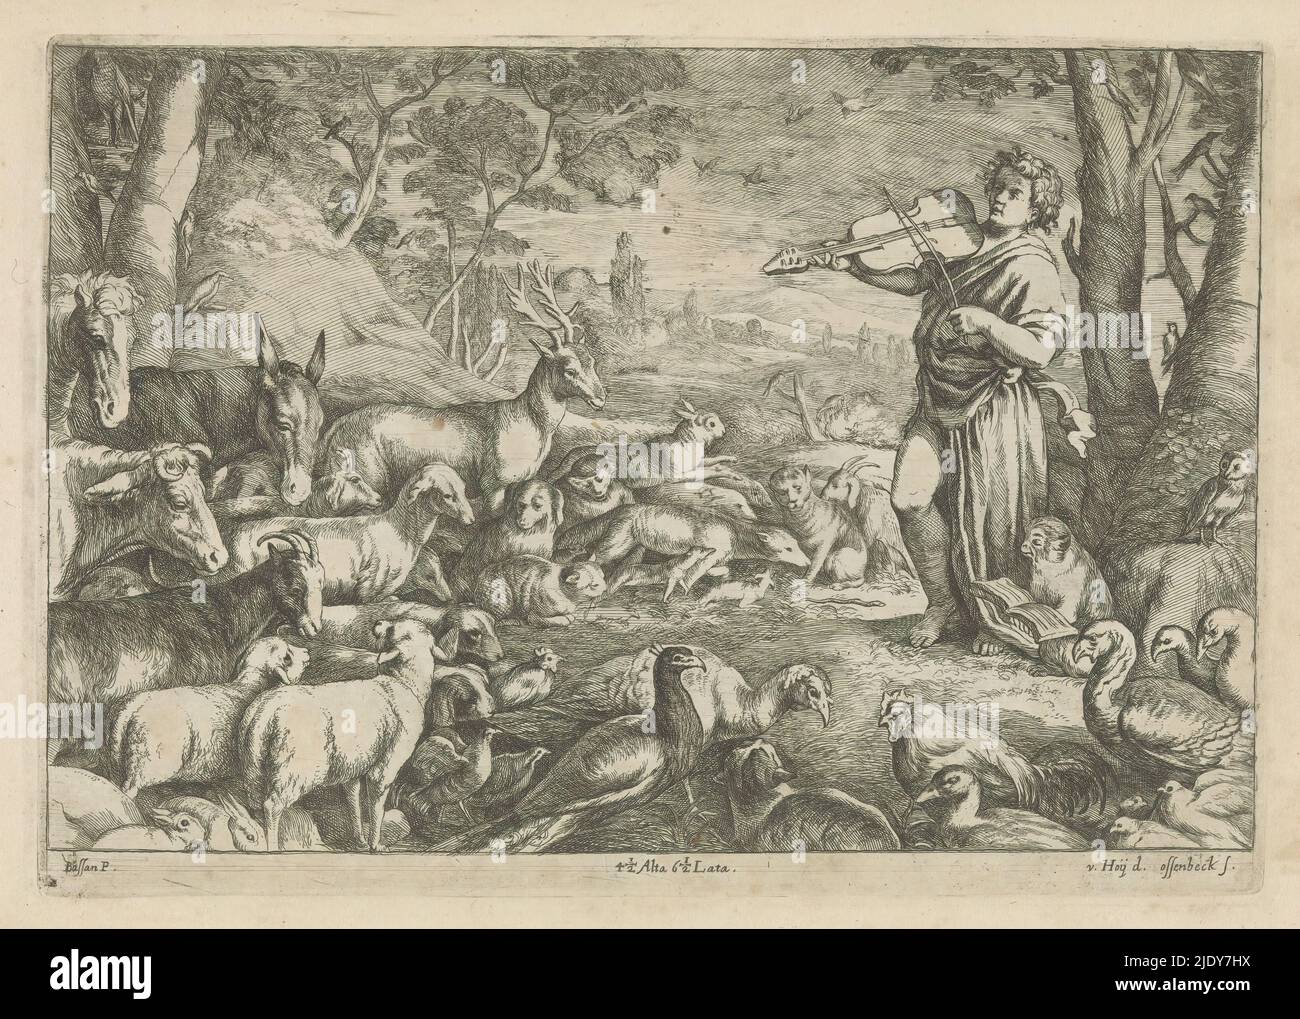 Orpheus enchants the animals with his music, Orpheus stands under a tree and plays a lira da braccio. Various wild and tame animals listen to his playing. This print is part of an album., print maker: Jan van Ossenbeeck, (mentioned on object), after painting by: Leandro Bassano, (mentioned on object), publisher: David Teniers (II), after painting by: Italy, publisher: Brussels, 1660, paper, etching, height 218 mm × width 310 mm Stock Photo